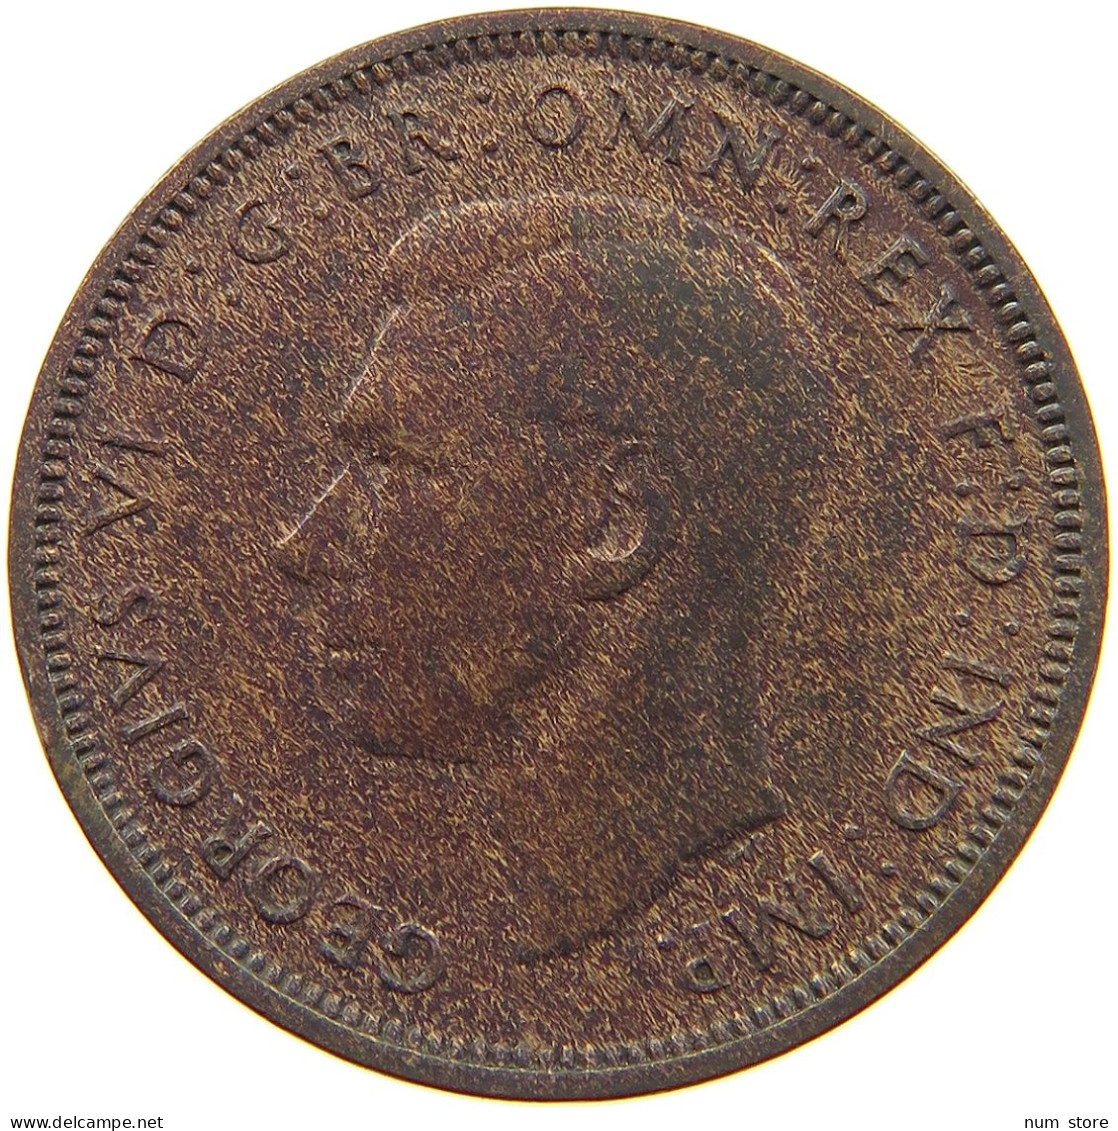 GREAT BRITAIN HALFPENNY 1939 #a066 0233 - C. 1/2 Penny